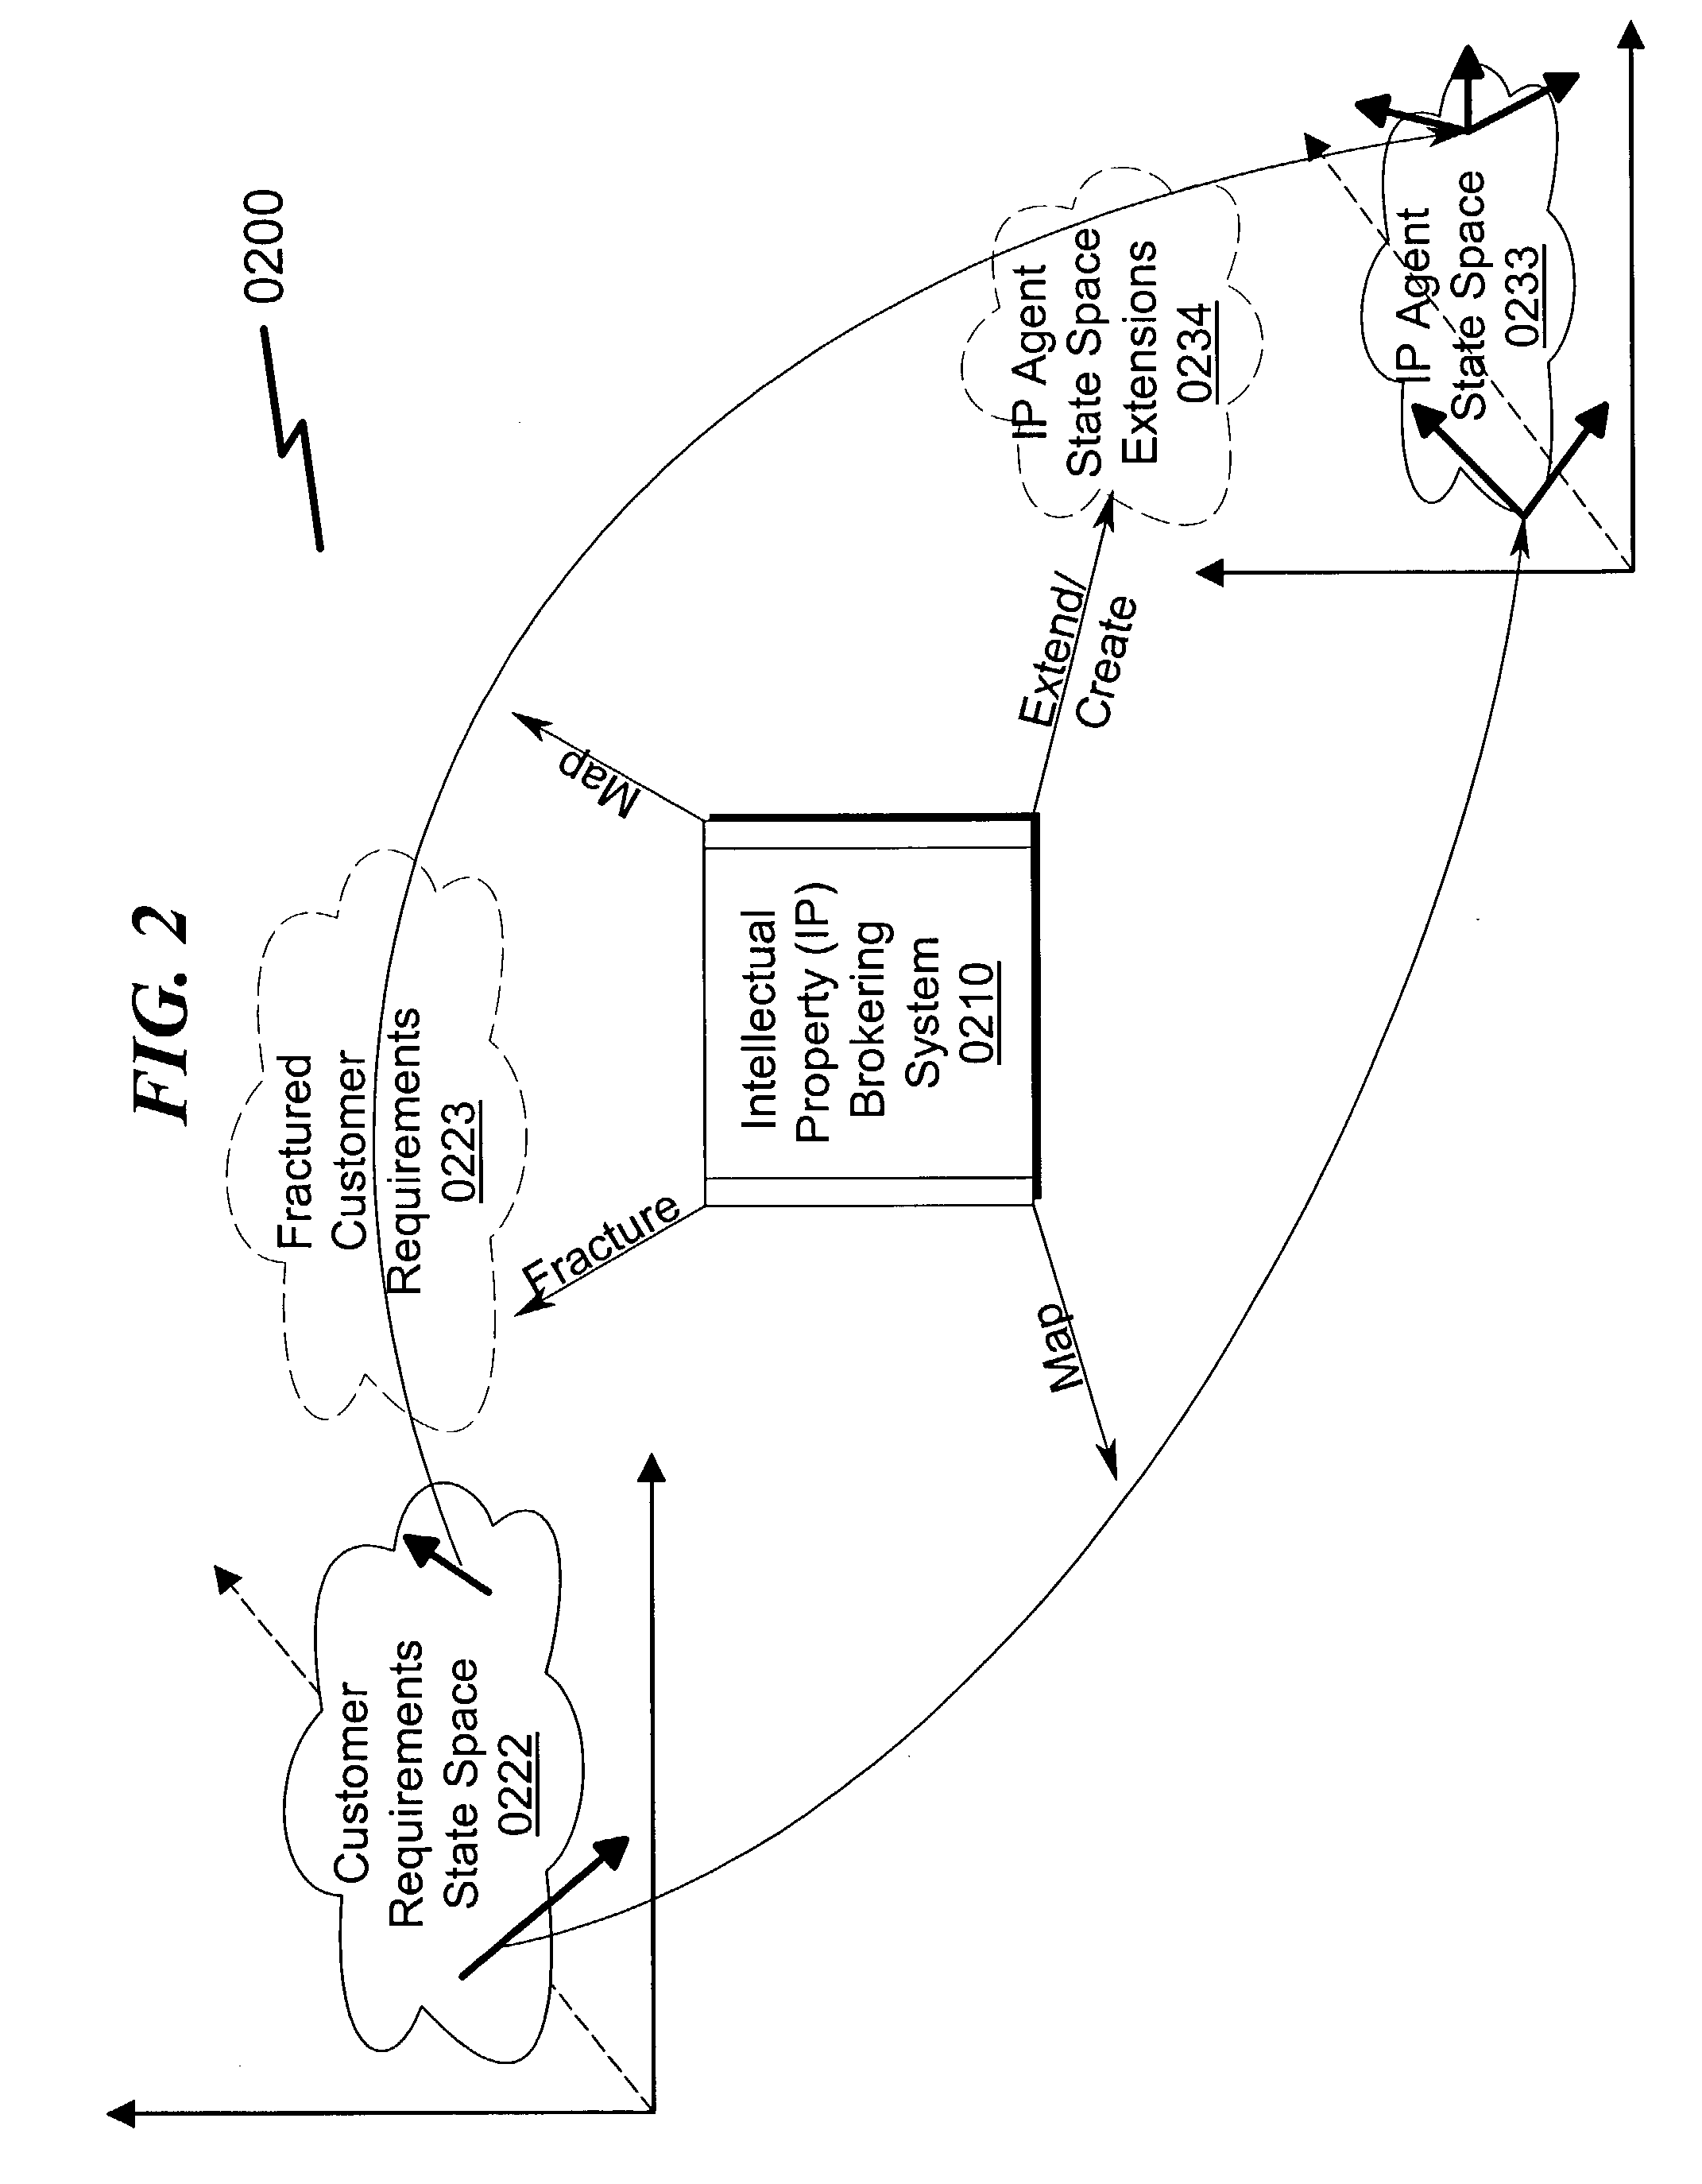 Intelectual property (IP) brokering system and method